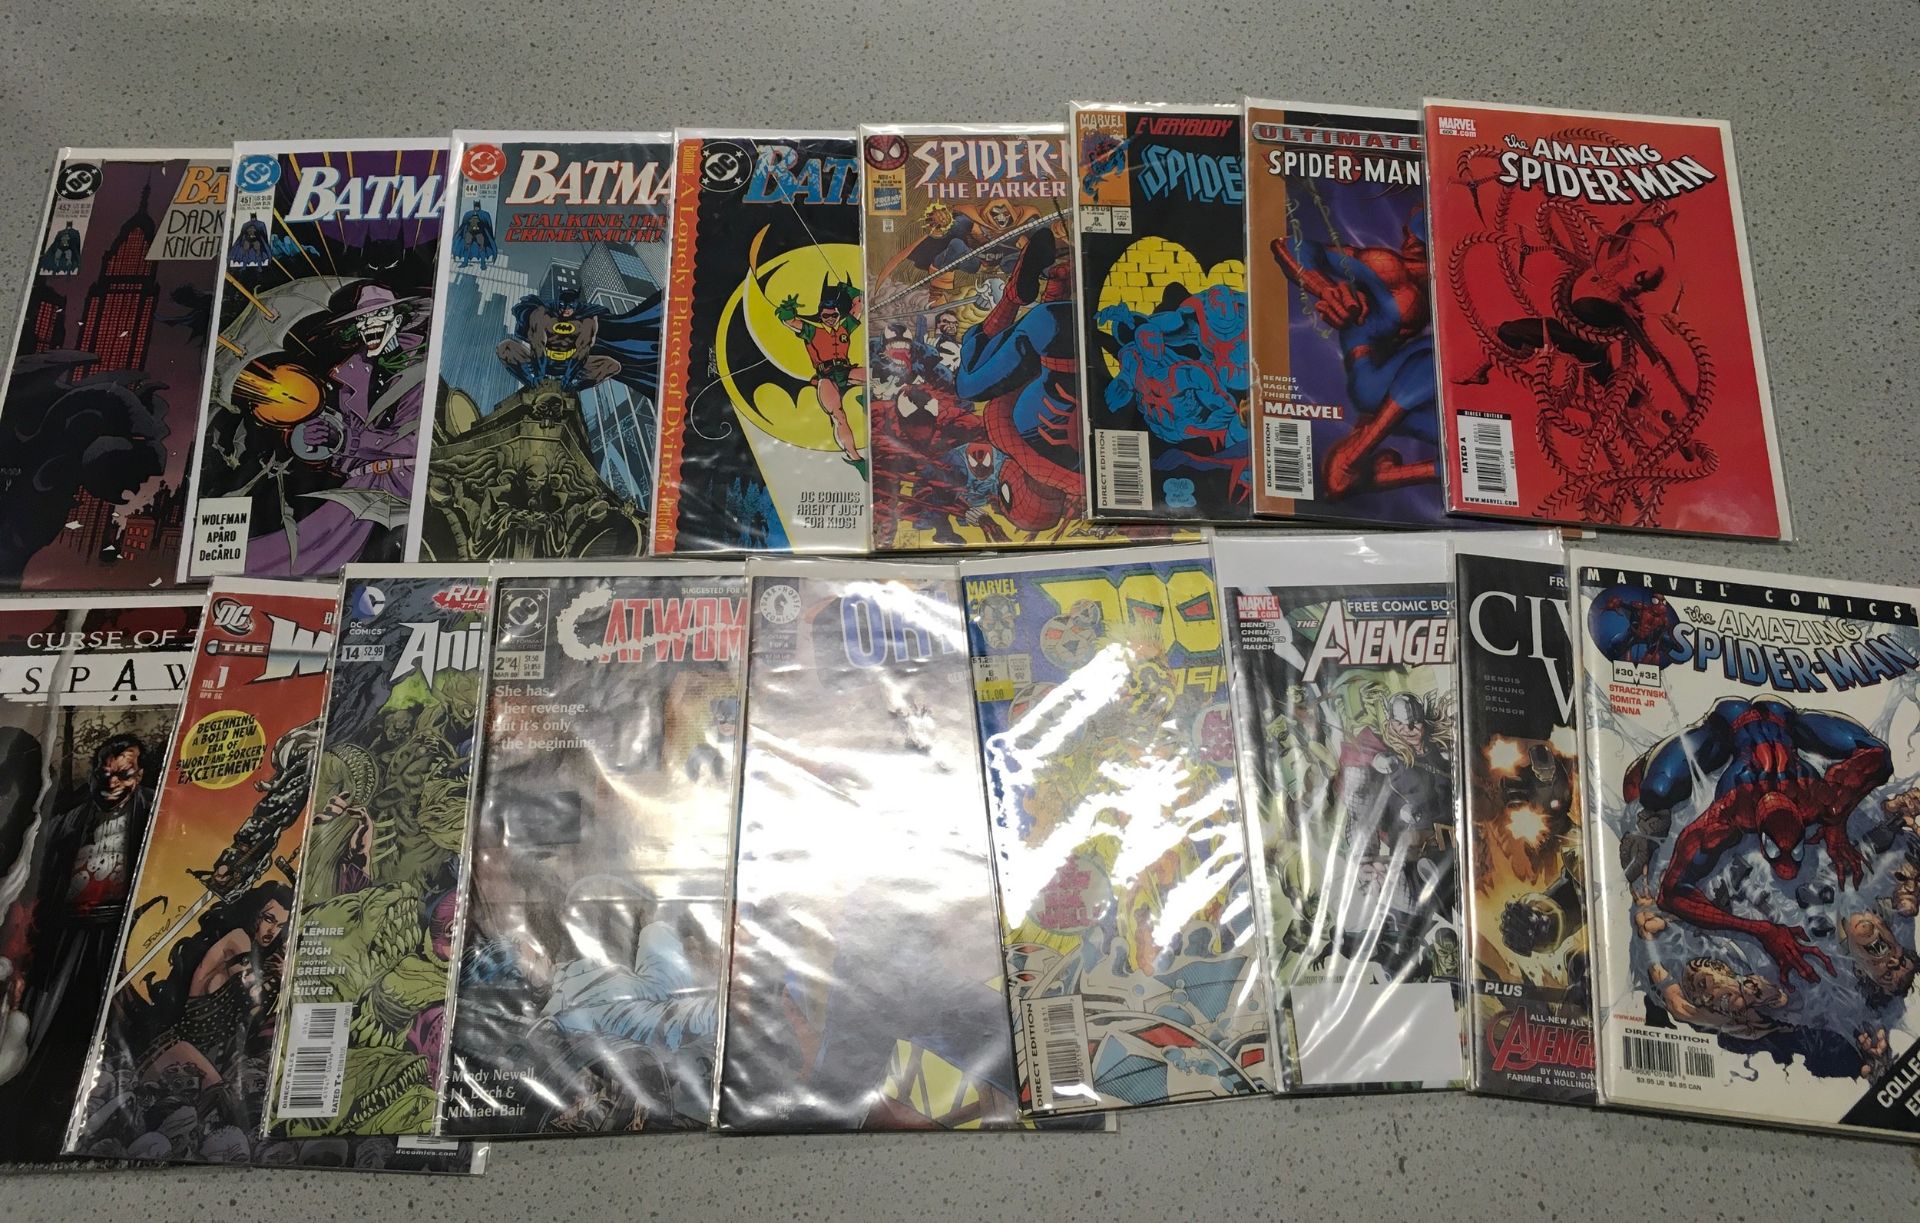 Approx 200+ comics including Marvel, DC and others (only an array of comics pictured).